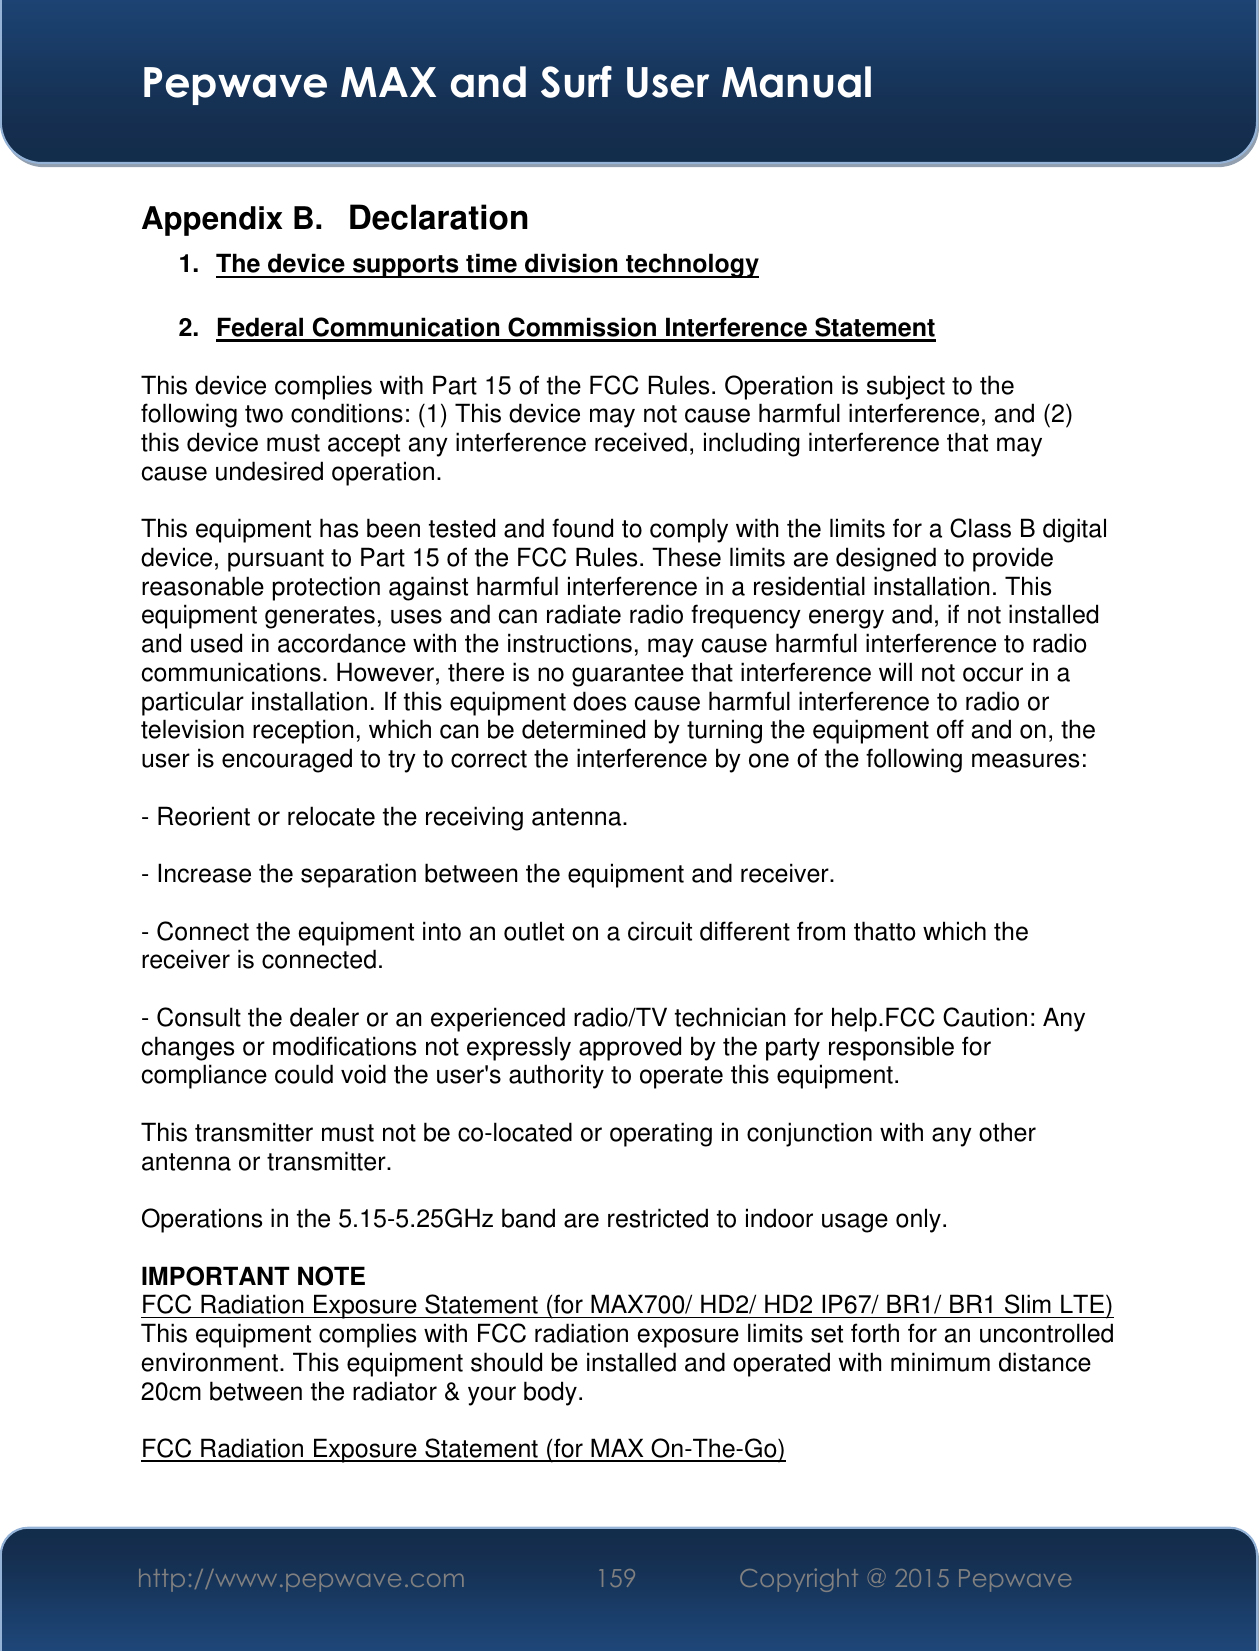  Pepwave MAX and Surf User Manual http://www.pepwave.com 159 Copyright @ 2015 Pepwave   Appendix B.  Declaration 1.  The device supports time division technology  2.  Federal Communication Commission Interference Statement  This device complies with Part 15 of the FCC Rules. Operation is subject to the following two conditions: (1) This device may not cause harmful interference, and (2) this device must accept any interference received, including interference that may cause undesired operation.  This equipment has been tested and found to comply with the limits for a Class B digital device, pursuant to Part 15 of the FCC Rules. These limits are designed to provide reasonable protection against harmful interference in a residential installation. This equipment generates, uses and can radiate radio frequency energy and, if not installed and used in accordance with the instructions, may cause harmful interference to radio communications. However, there is no guarantee that interference will not occur in a particular installation. If this equipment does cause harmful interference to radio or television reception, which can be determined by turning the equipment off and on, the user is encouraged to try to correct the interference by one of the following measures:  - Reorient or relocate the receiving antenna.  - Increase the separation between the equipment and receiver.  - Connect the equipment into an outlet on a circuit different from thatto which the receiver is connected.  - Consult the dealer or an experienced radio/TV technician for help.FCC Caution: Any changes or modifications not expressly approved by the party responsible for compliance could void the user&apos;s authority to operate this equipment.  This transmitter must not be co-located or operating in conjunction with any other antenna or transmitter.  Operations in the 5.15-5.25GHz band are restricted to indoor usage only.  IMPORTANT NOTE FCC Radiation Exposure Statement (for MAX700/ HD2/ HD2 IP67/ BR1/ BR1 Slim LTE) This equipment complies with FCC radiation exposure limits set forth for an uncontrolled environment. This equipment should be installed and operated with minimum distance 20cm between the radiator &amp; your body.  FCC Radiation Exposure Statement (for MAX On-The-Go)  